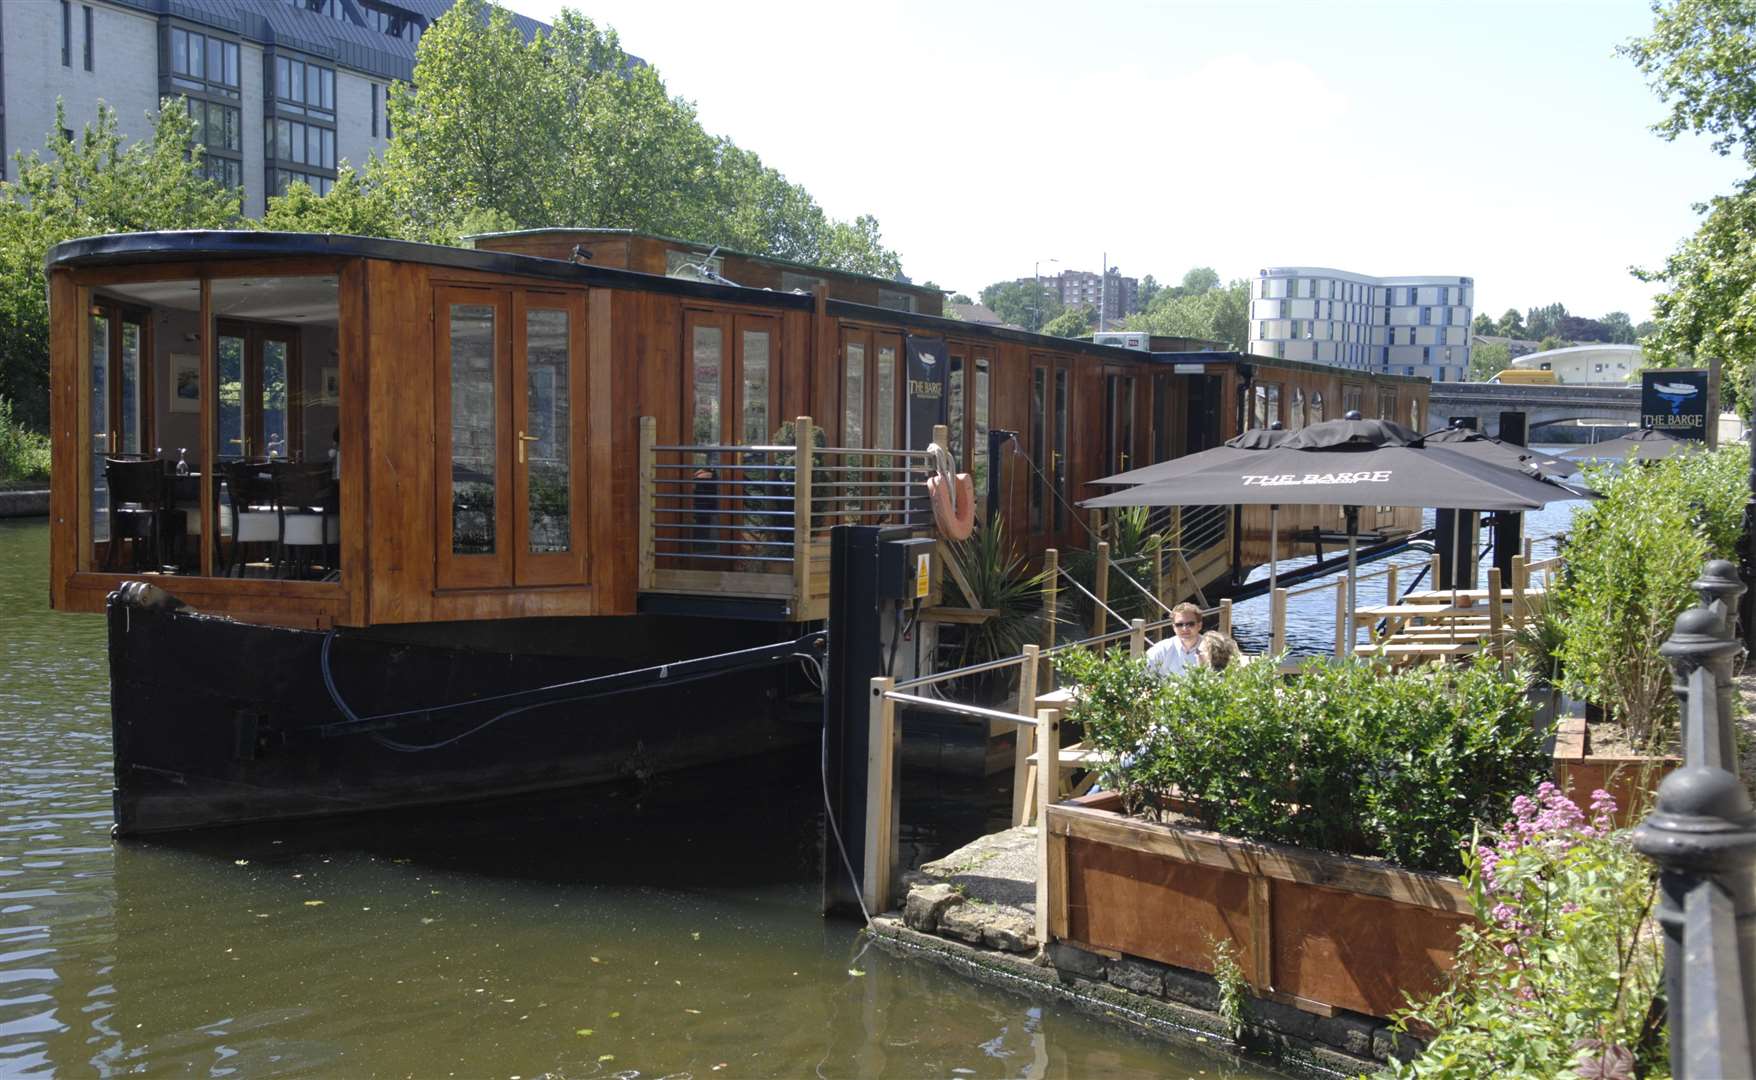 The Barge Restaurant in Maidstone